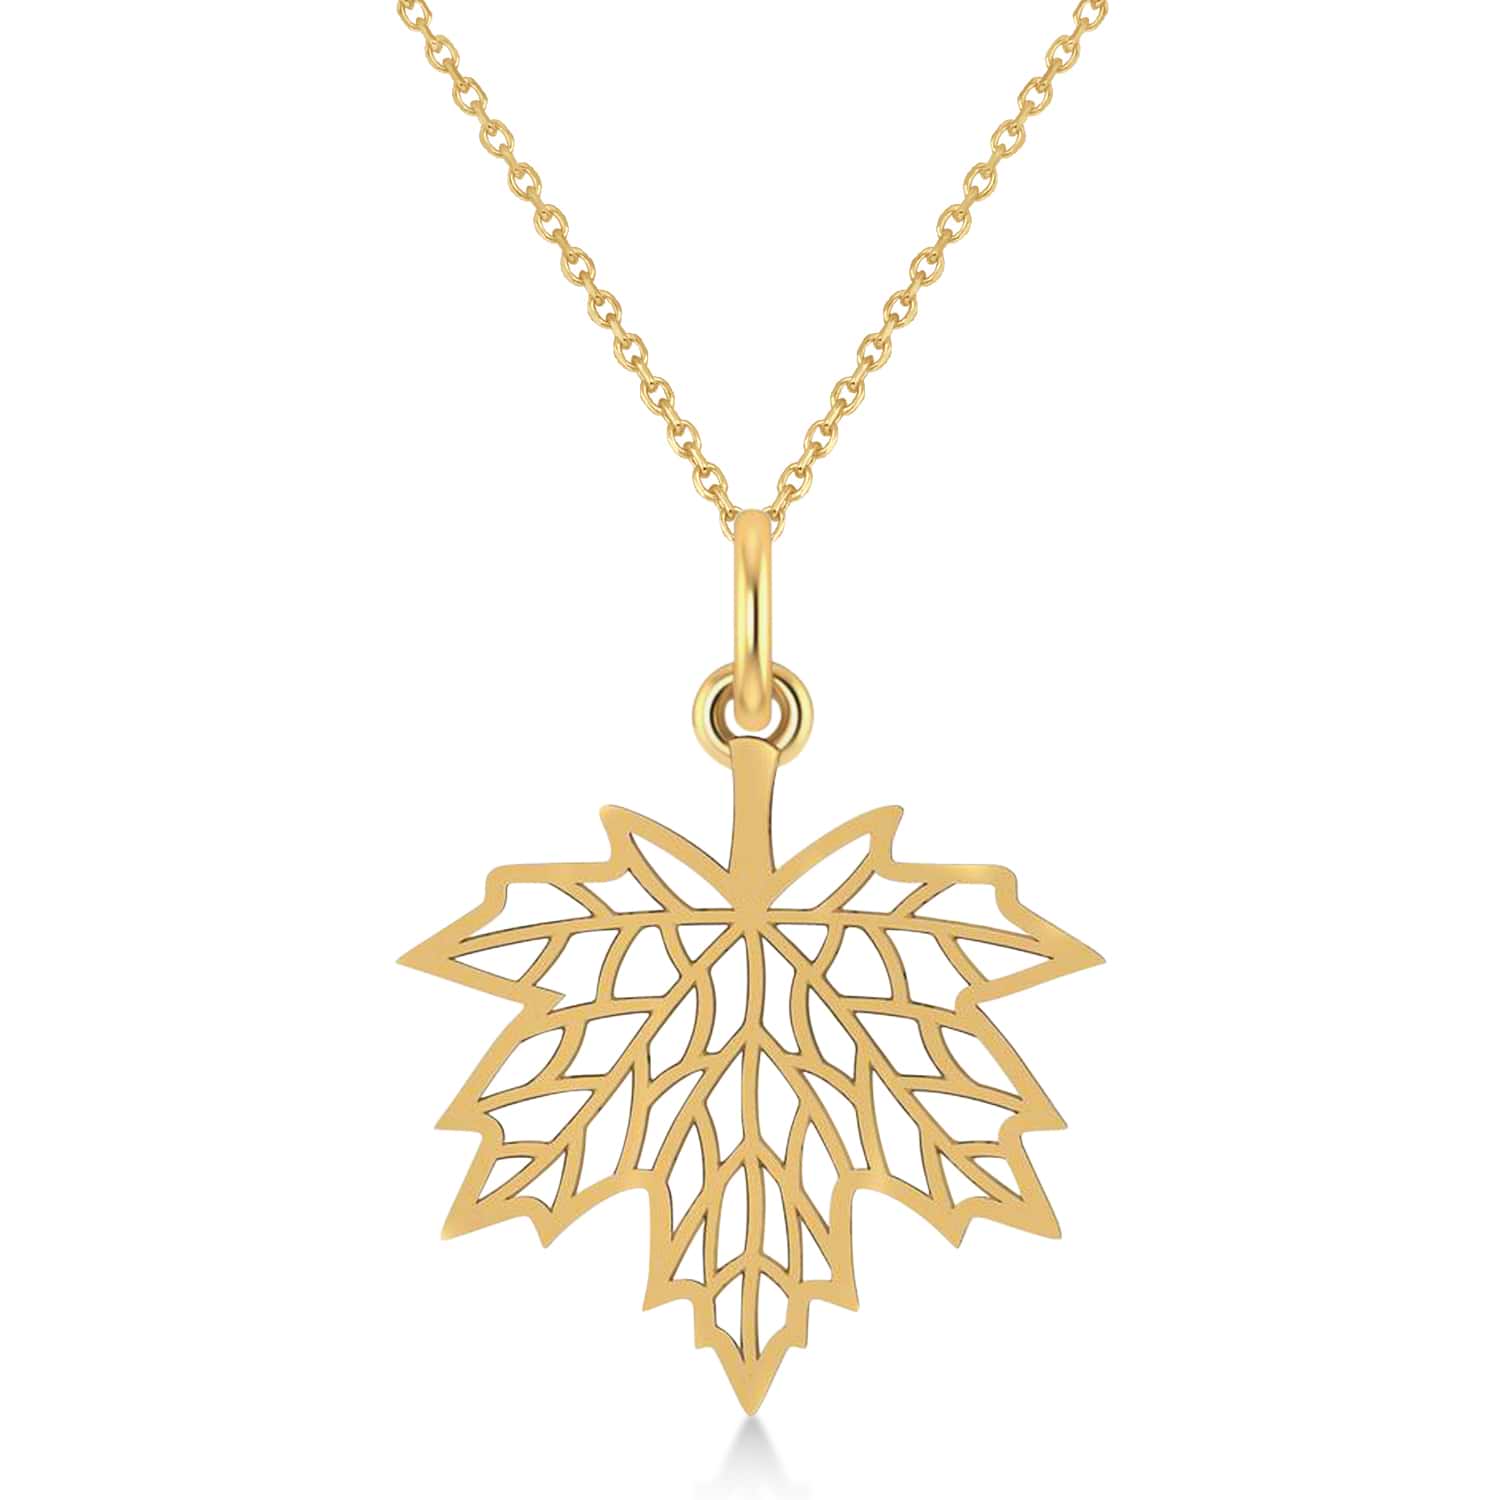 Maple Leaf Pendant Necklace 14k Yellow Gold